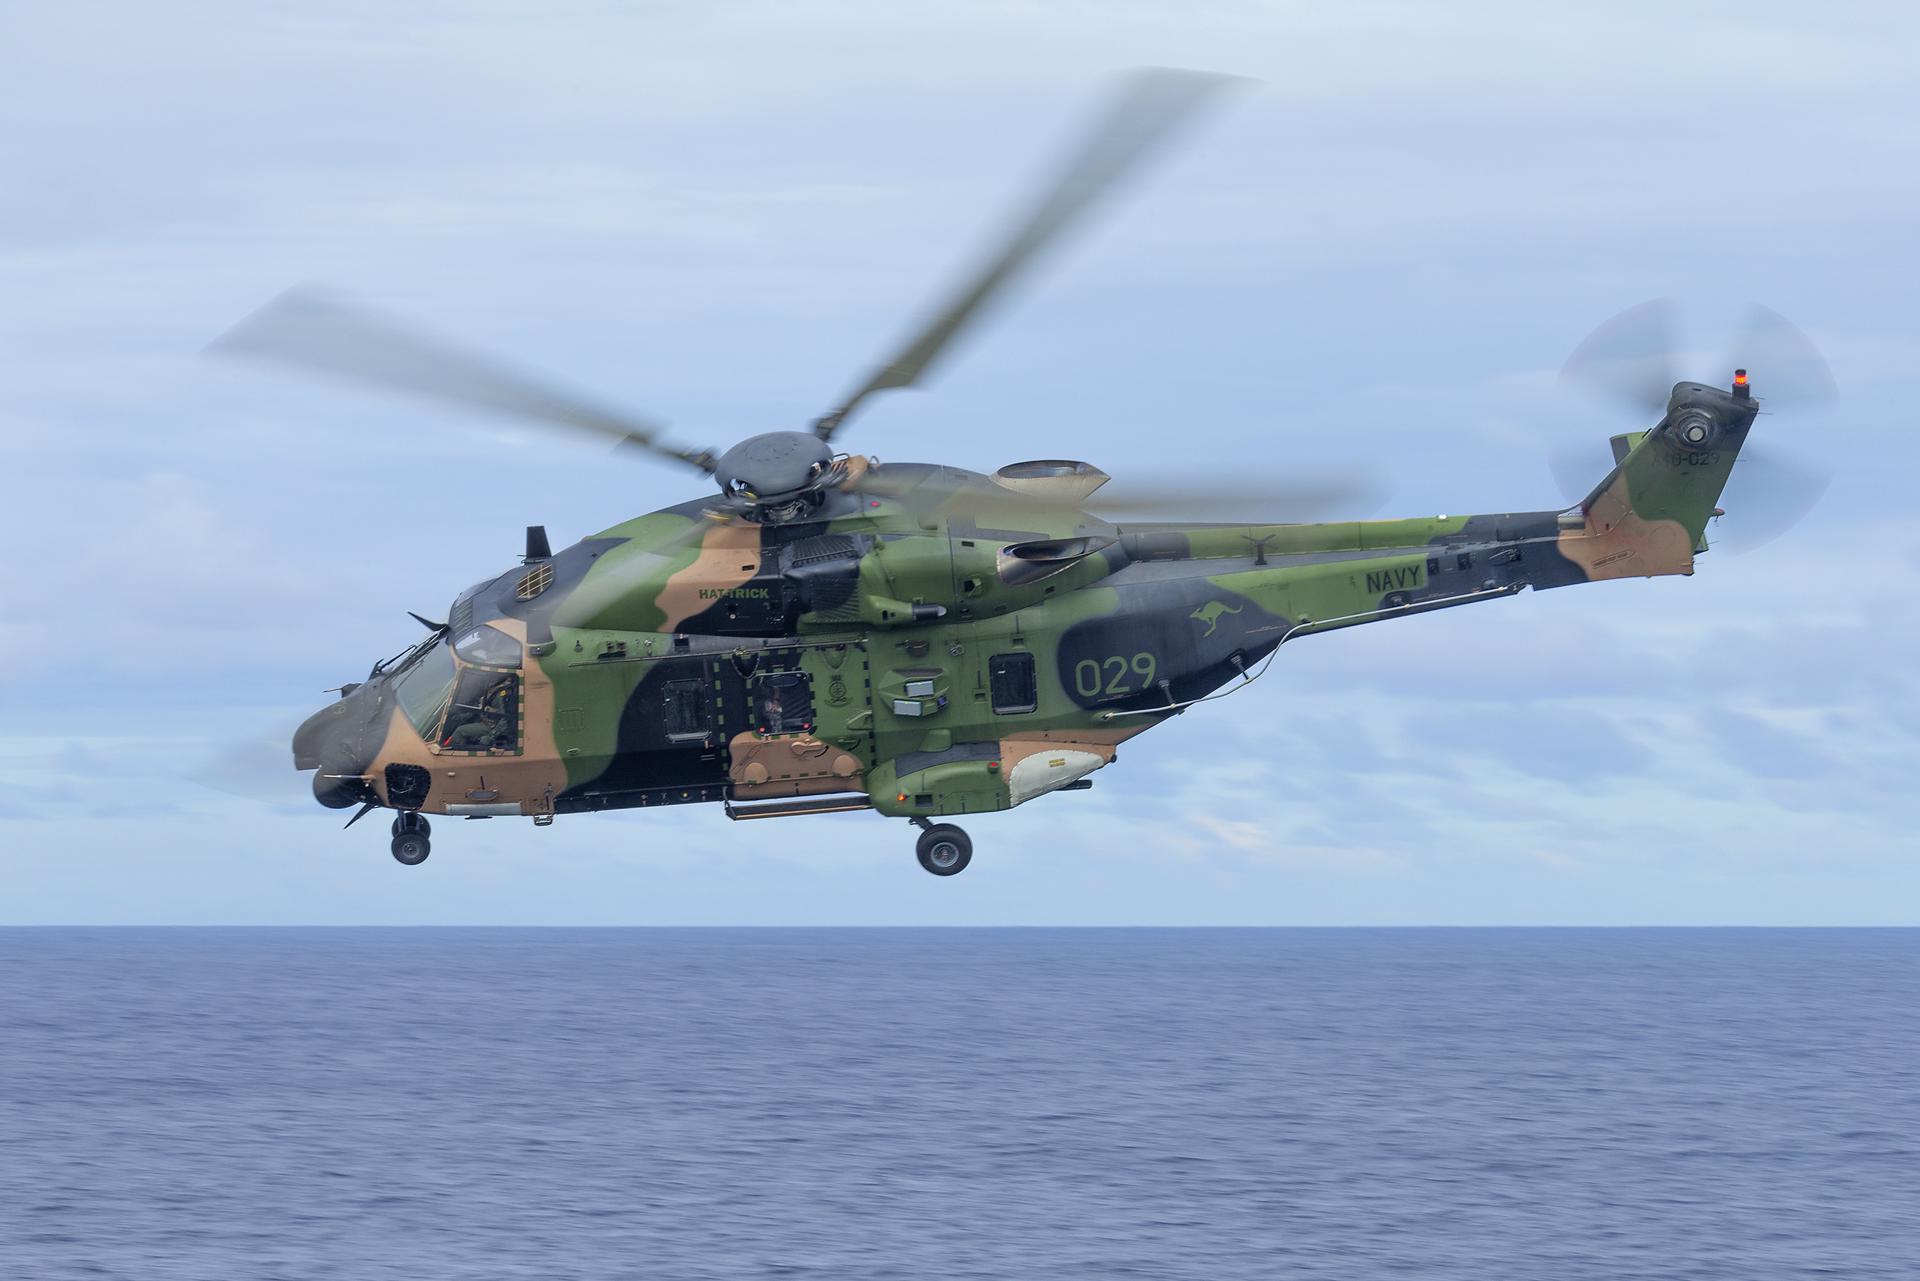 A handout file photo made available on 29 July 2023 by the Australian Defence Force (ADF) shows an Australian Army MRH-90 Taipan helicopter conducting flying serials during a ship's transit to Vanuatu, 23 July 2020 (issued 29 July 2023). EFE-EPA/ADF/LSIS James McDougall HANDOUT MANDATORY CREDIT: COMMONWEALTH OF AUSTRALIA 2023, DEPARTMENT OF DEFENCE/AUSTRALIA AND NEW ZEALAND OUT/NO ARCHIVING, EDITORIAL USE ONLY HANDOUT EDITORIAL USE ONLY/NO SALES